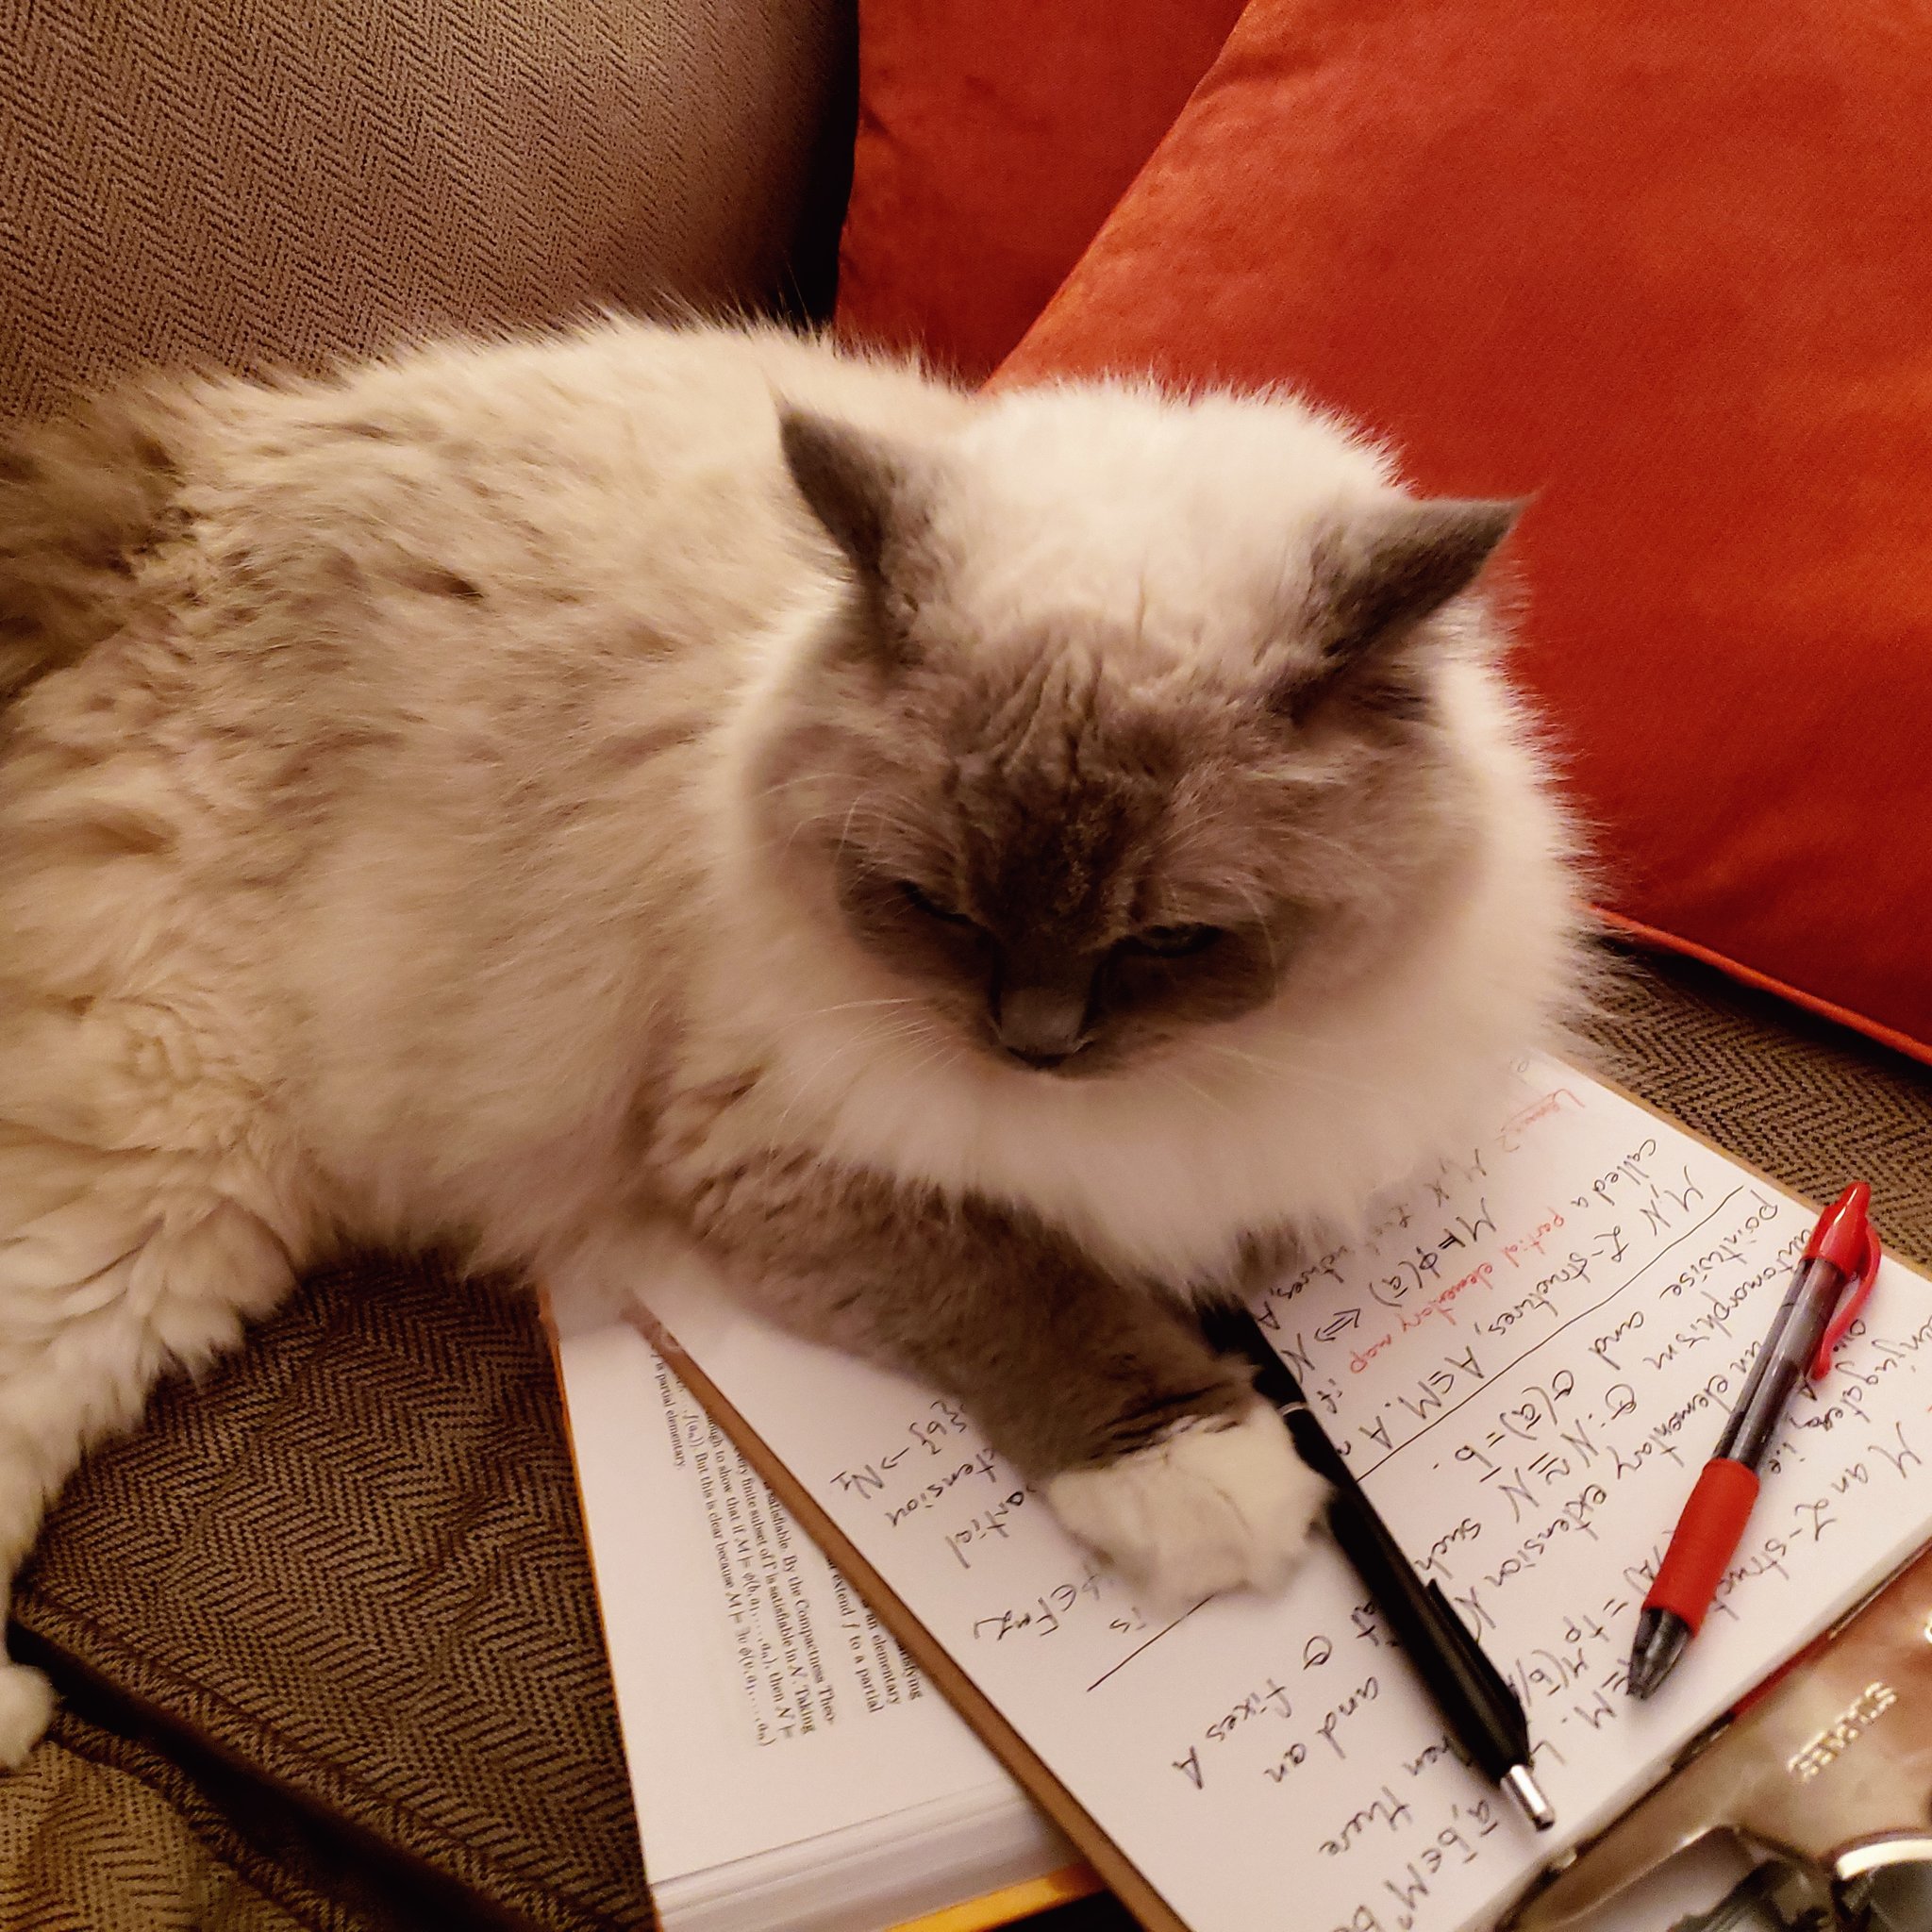 A cat laying on a book and notepad